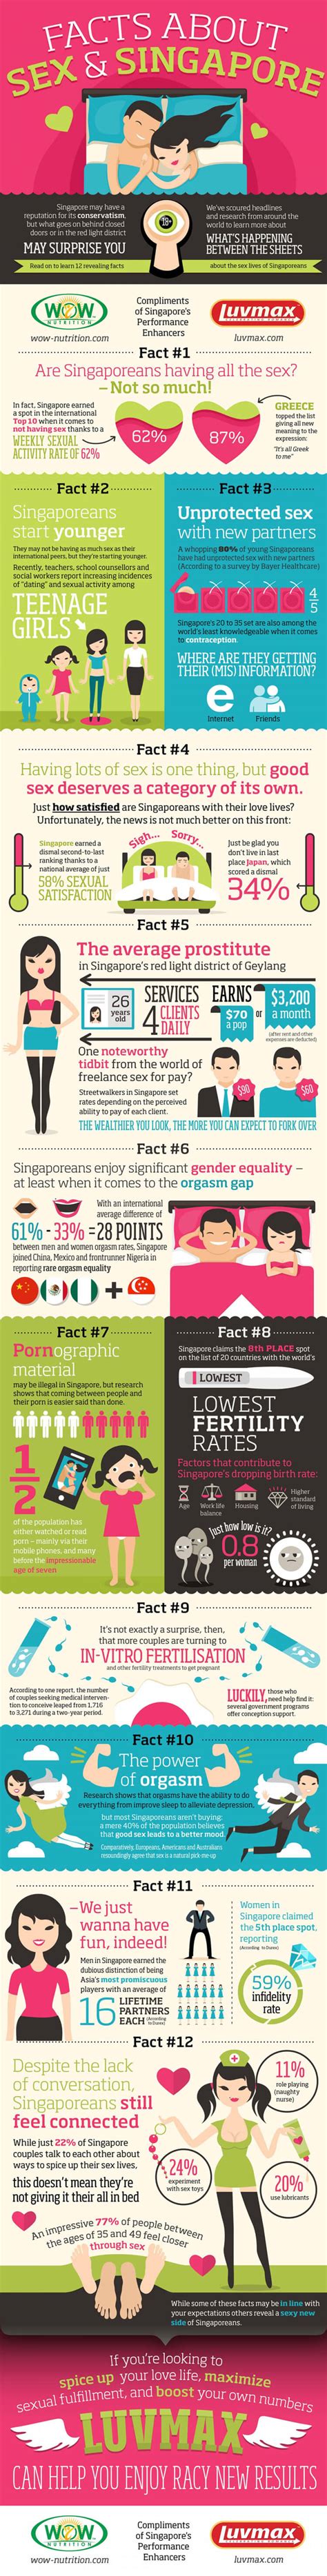 facts about sex and singapore infographic